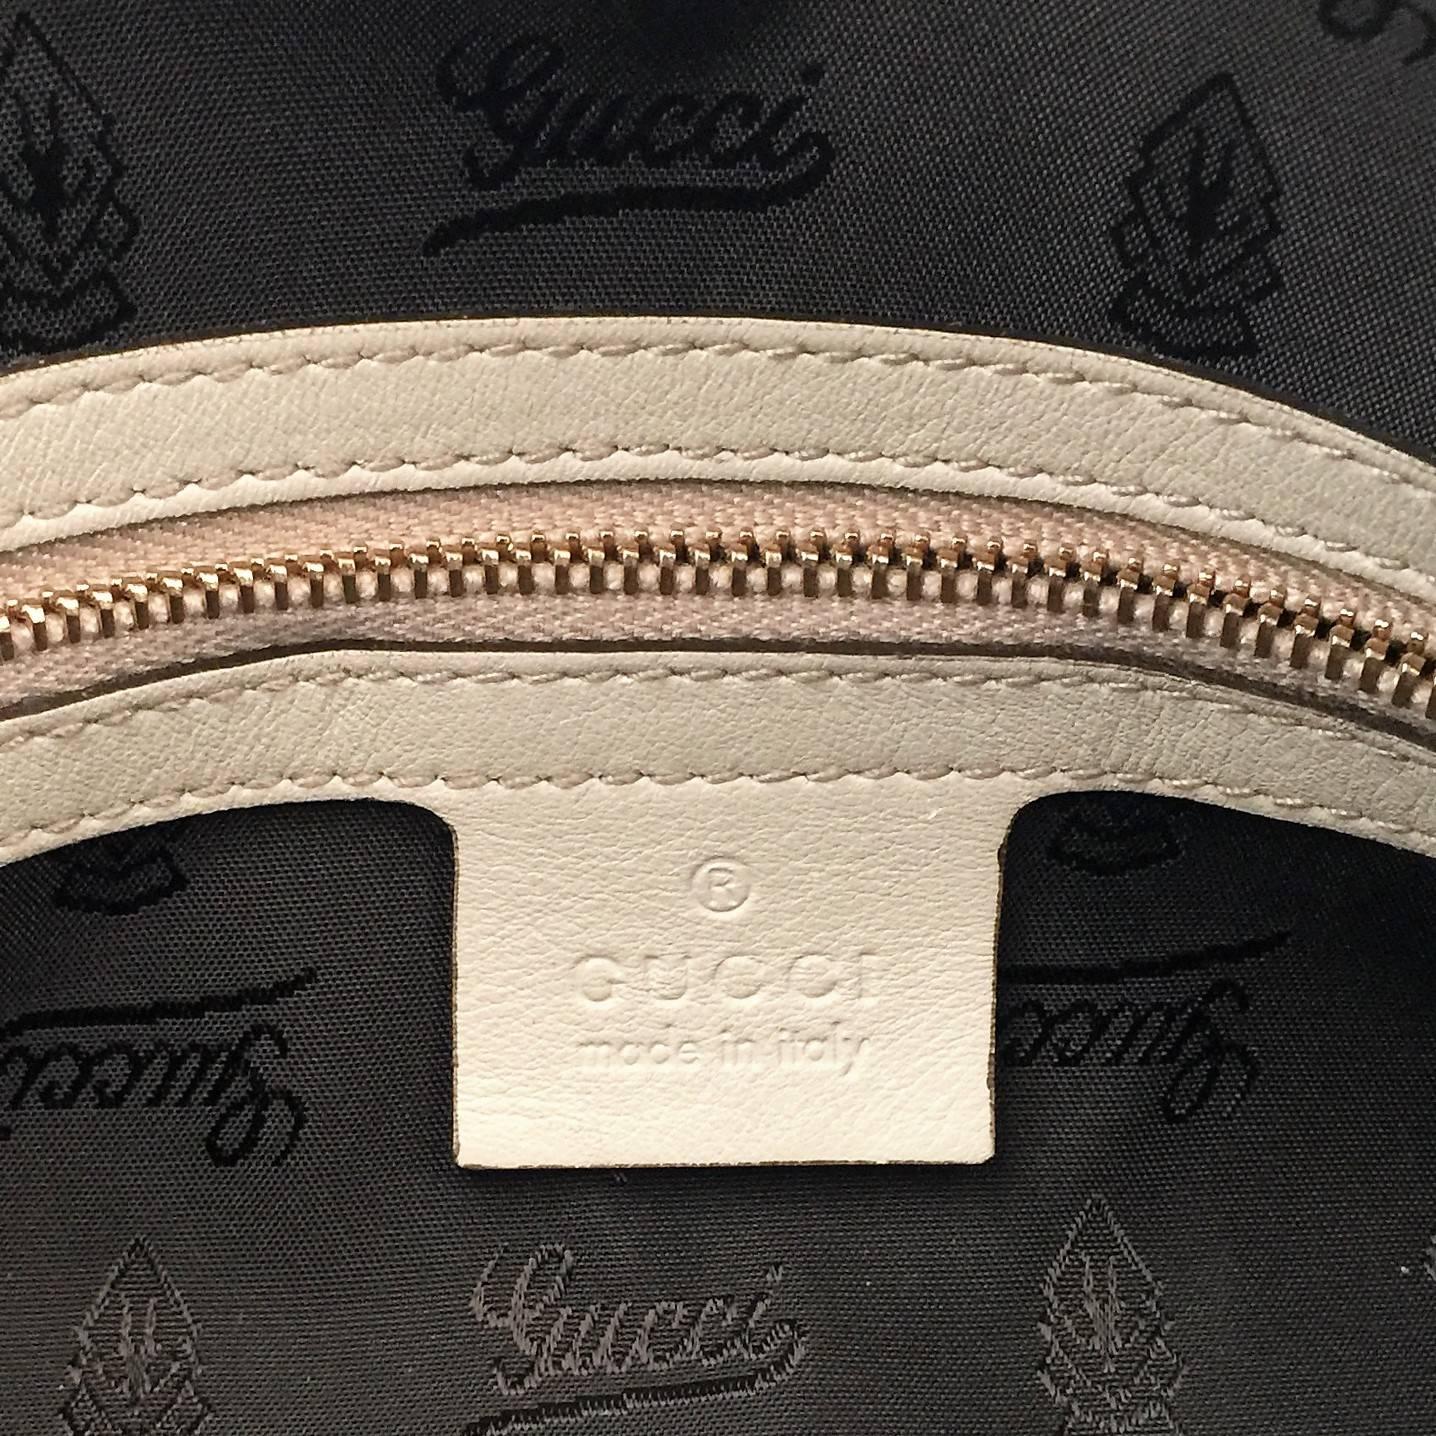 Gucci Bamboo Python Hand Bag / Crossbody Bag In Excellent Condition For Sale In Milan, IT